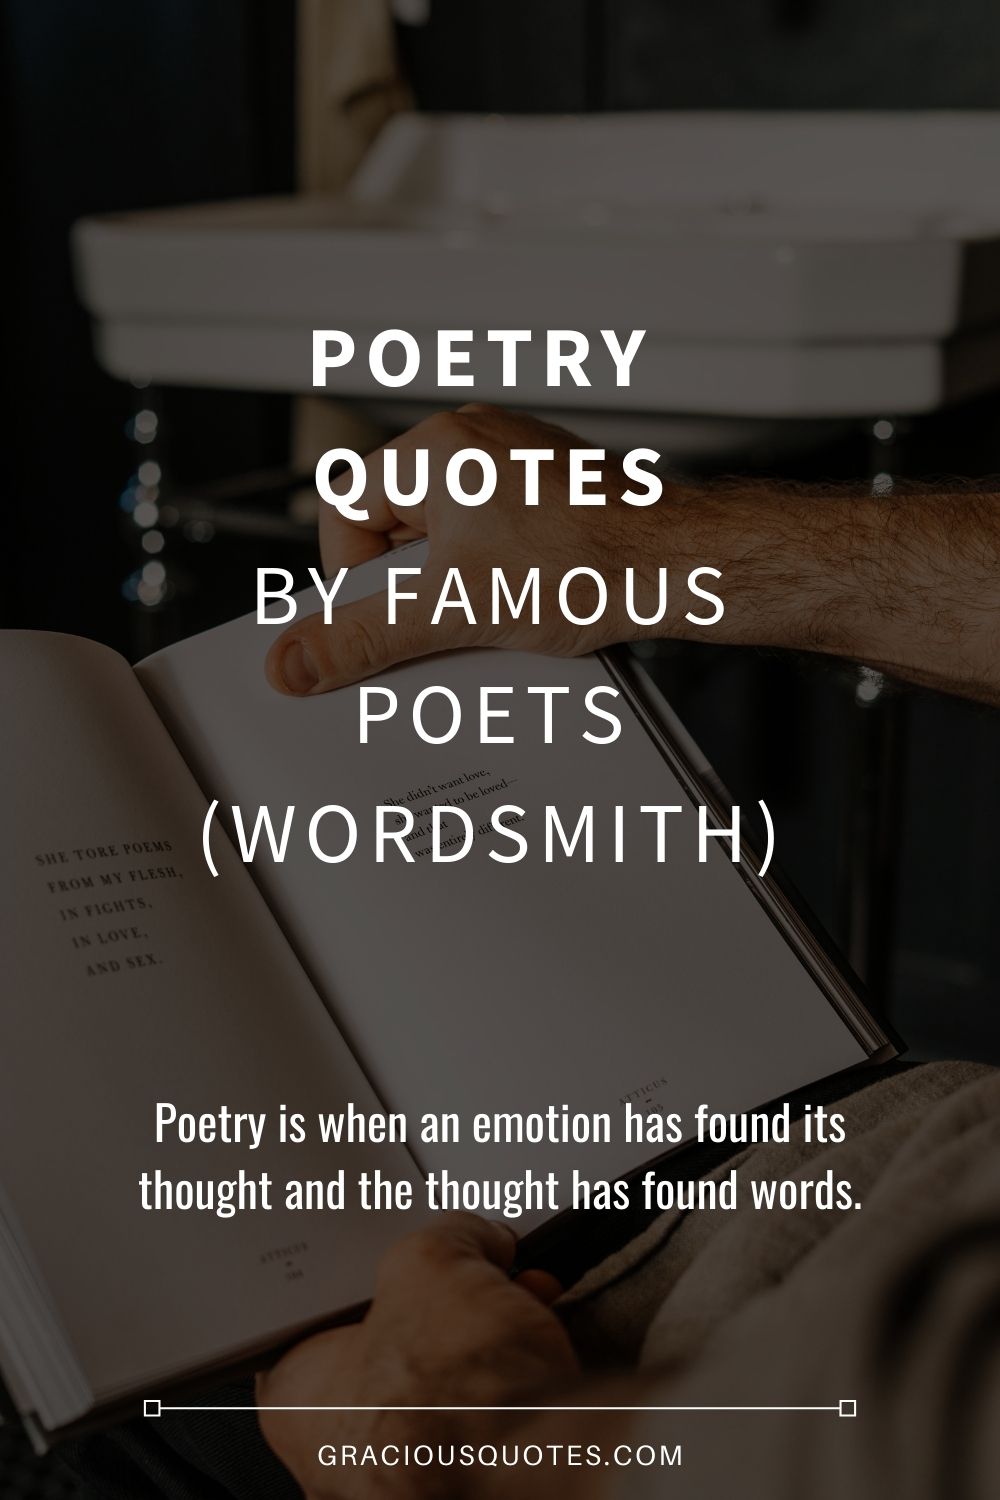 Poetry Quotes by Famous Poets (WORDSMITH) - Gracious Quotes